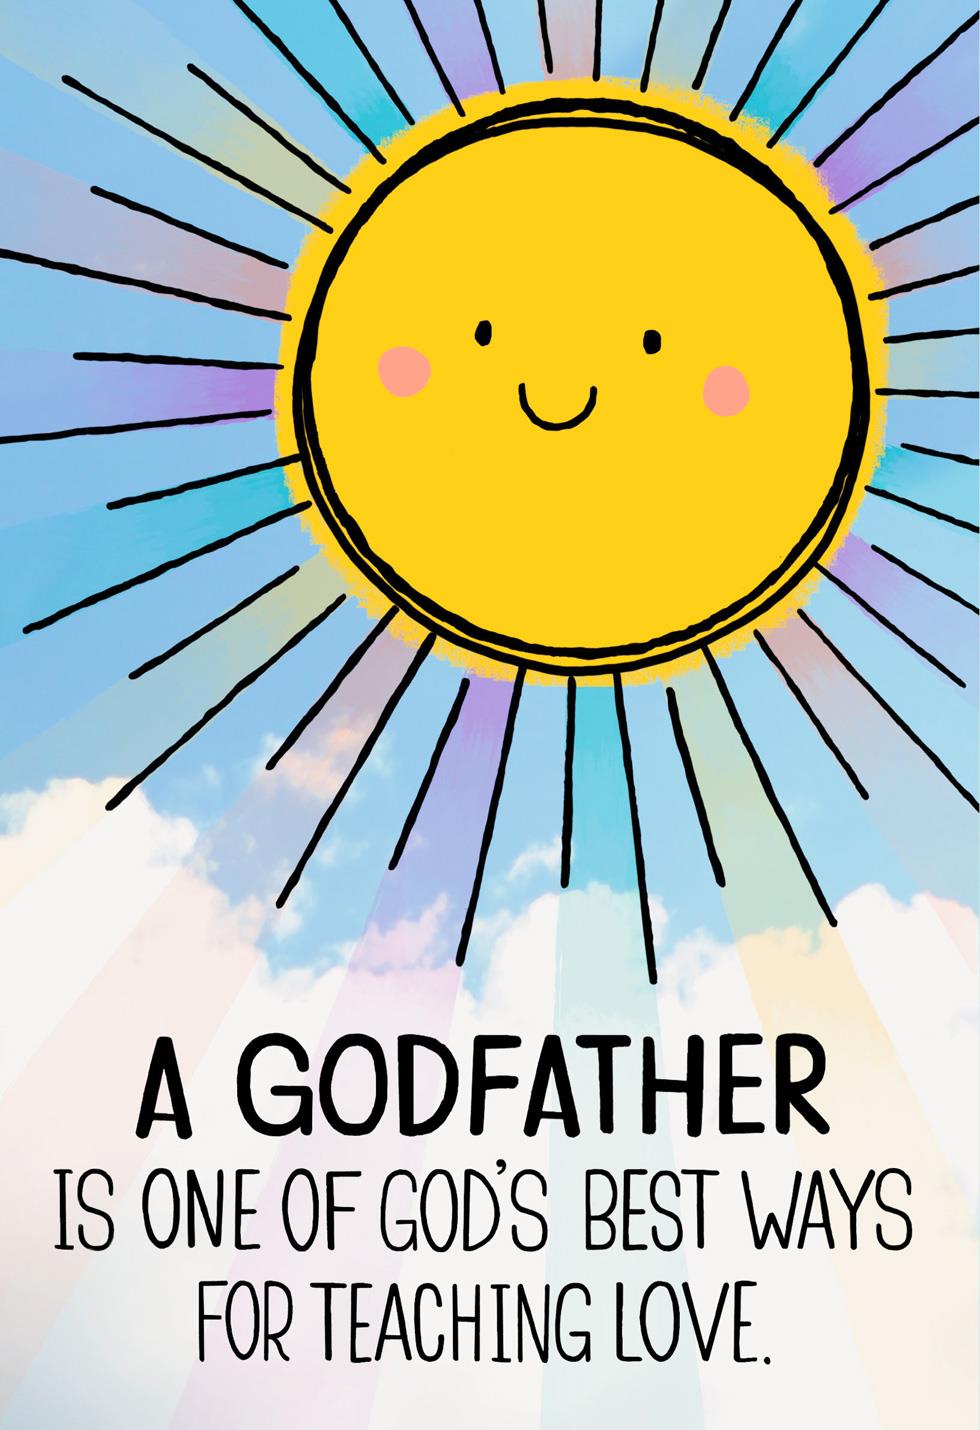 Smiling Sun Father's Day Card for Godfather - Greeting Cards - Hallmark